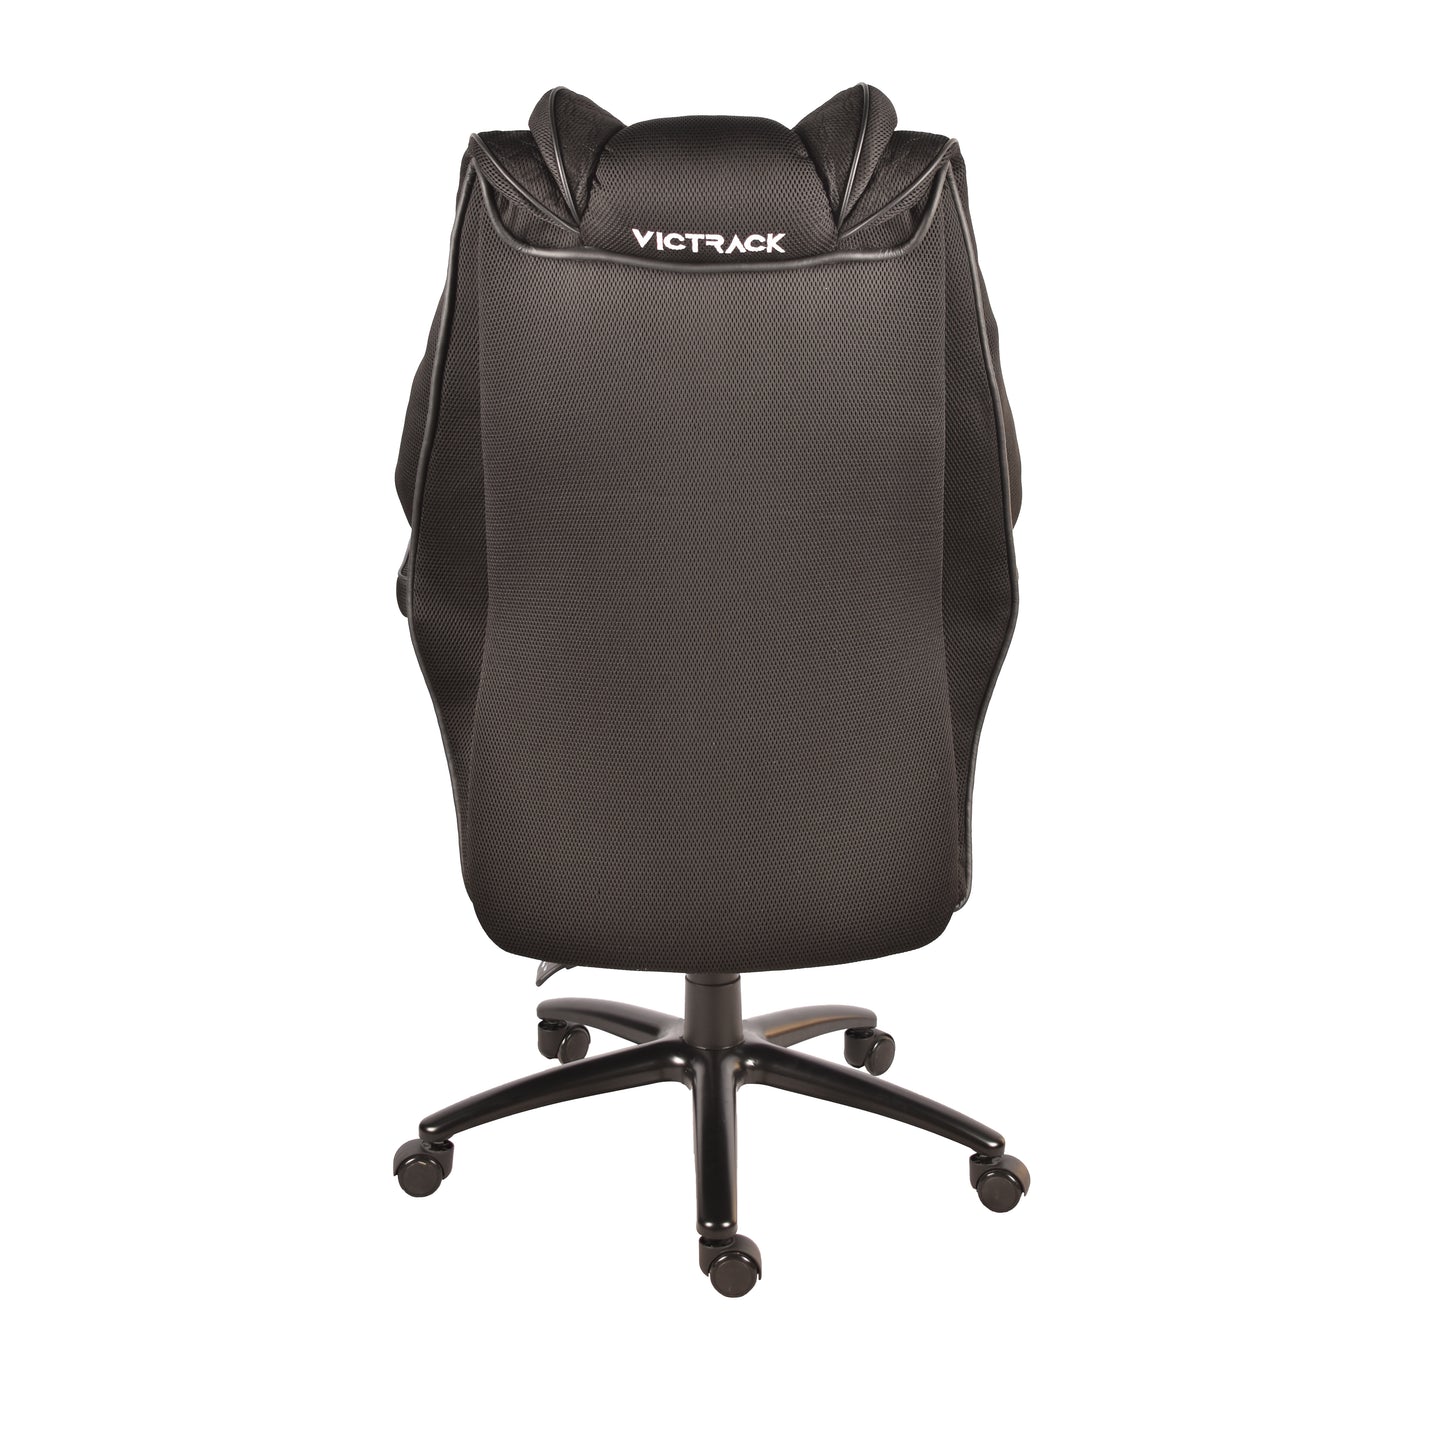 Victrack Premium Pro Gaming Chair, Computer Chair, Height Adjustable, with 360°-Swivel Seat and for Office or Gaming, A-01, Black